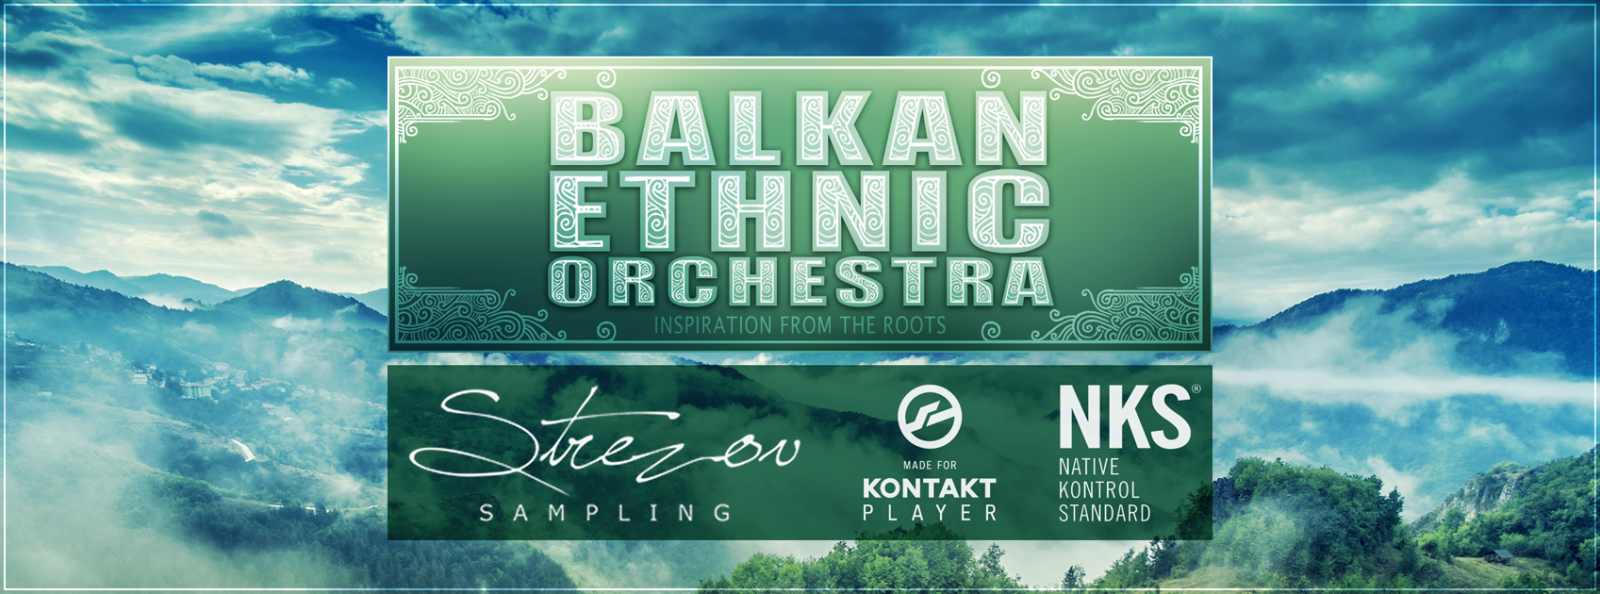 Balkan Ethnic Orchestra by Strezov Sampling Review